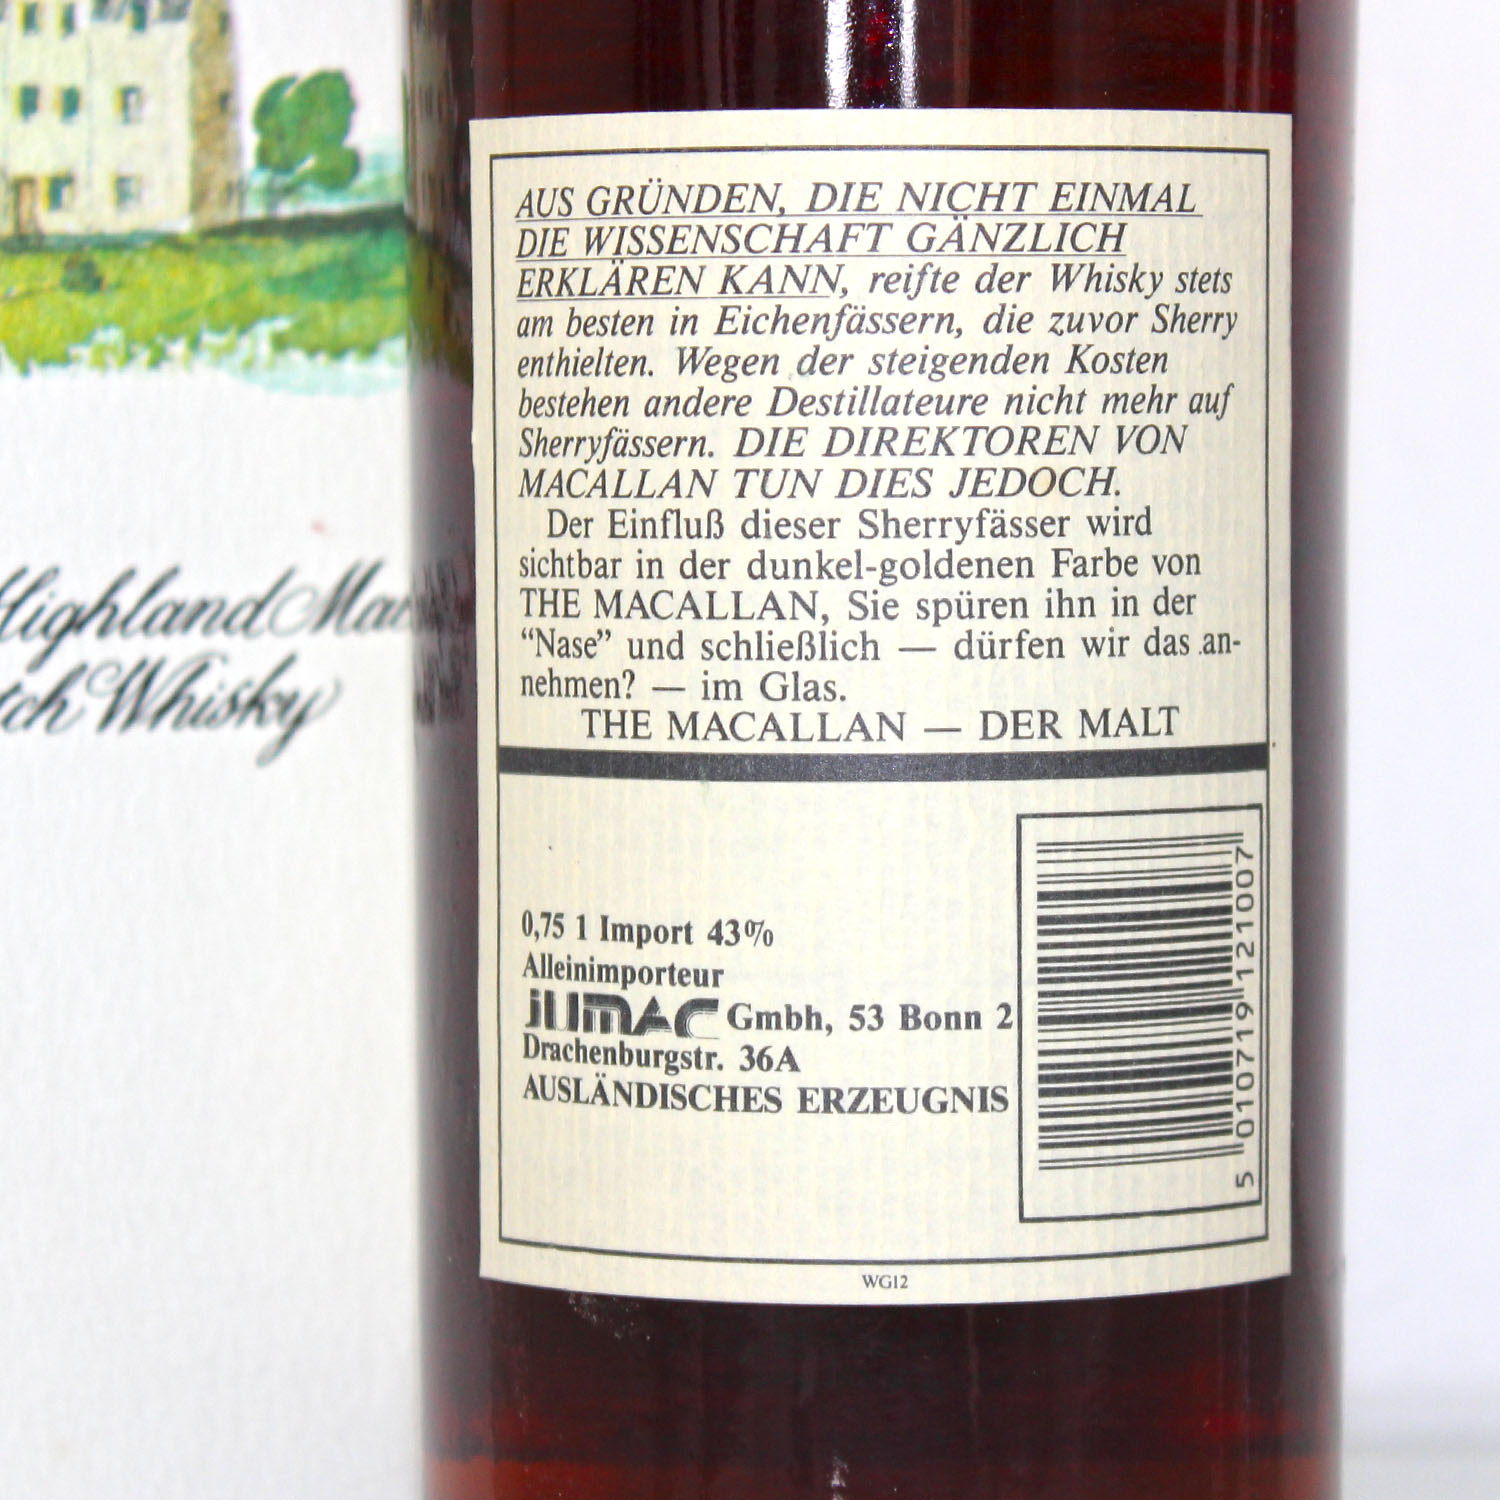 Macallan 12 Years Bot 1980 75cl back label